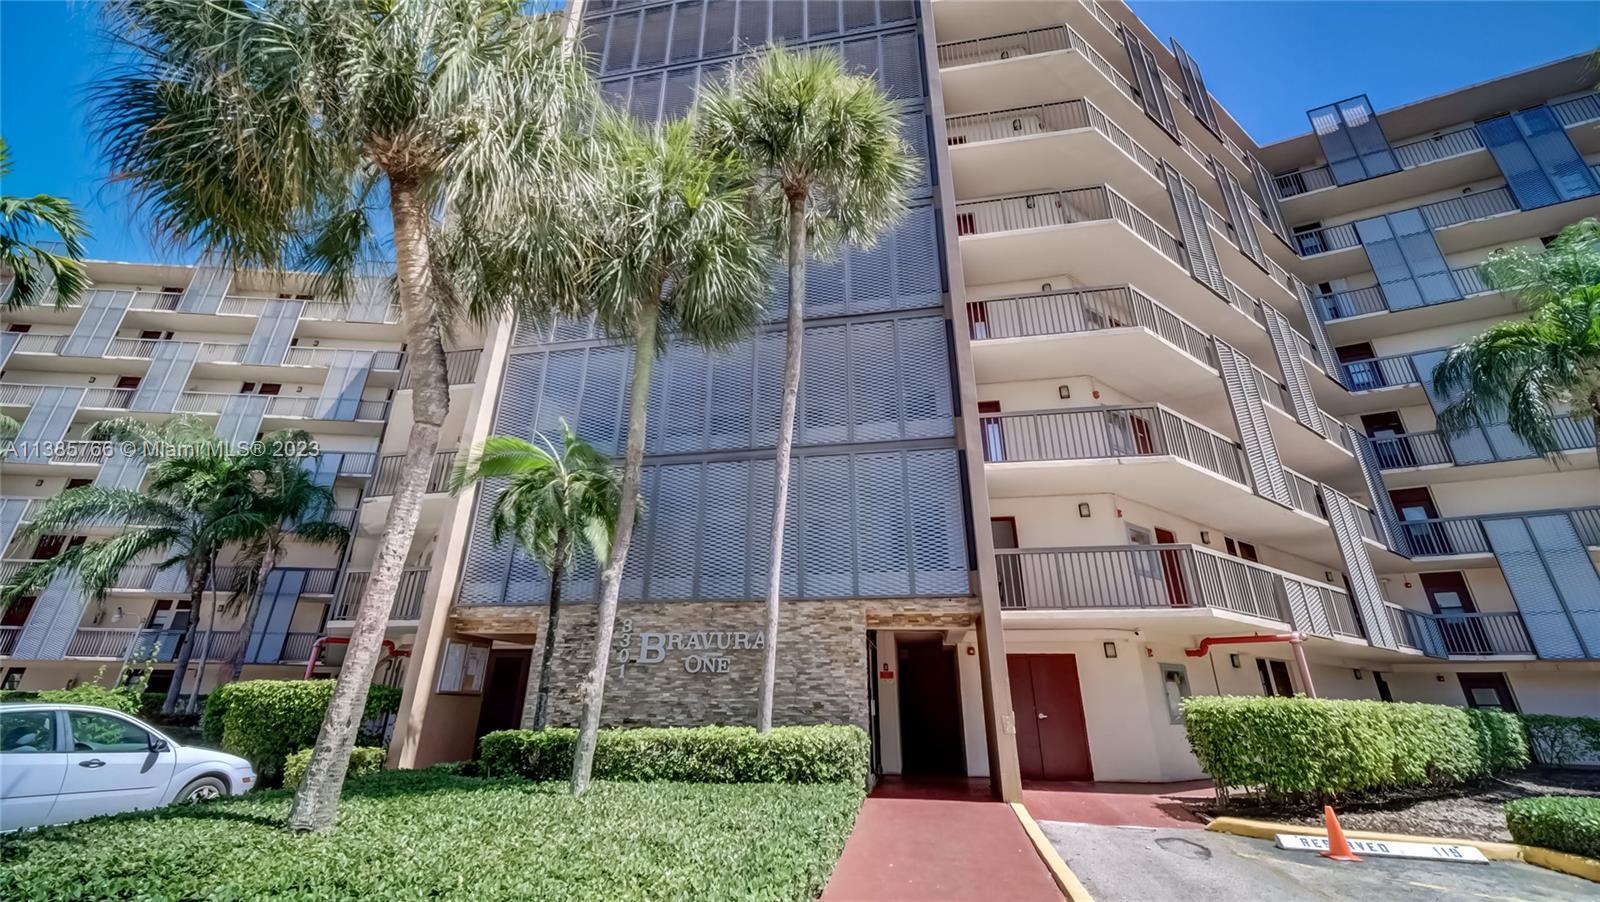 One of the MOST affordable 2/2 condo on Country Club Dr. ! Looking to live in the prestigious, upsca